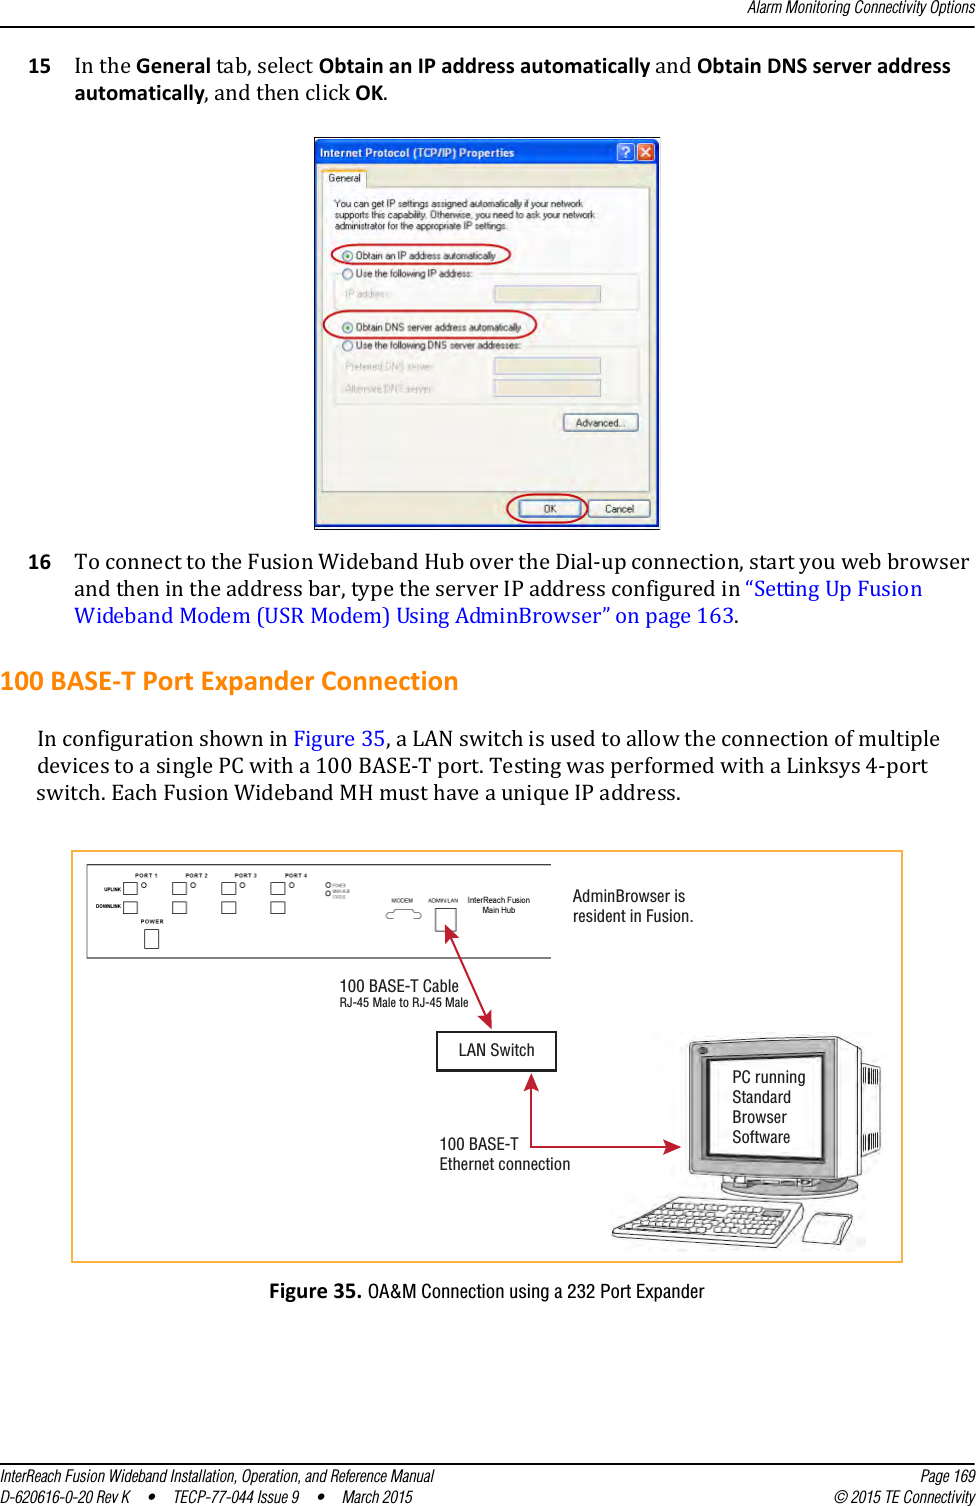 Alarm Monitoring Connectivity OptionsInterReach Fusion Wideband Installation, Operation, and Reference Manual Page 169D-620616-0-20 Rev K  •  TECP-77-044 Issue 9  •  March 2015 © 2015 TE Connectivity15 In the General tab, select Obtain an IP address automatically and Obtain DNS server address automatically, and then click OK.16 To connect to the Fusion Wideband Hub over the Dial-up connection, start you web browser and then in the address bar, type the server IP address configured in “Setting Up Fusion Wideband Modem (USR Modem) Using AdminBrowser” on page 163.100 BASE-T Port Expander ConnectionIn configuration shown in Figure 35, a LAN switch is used to allow the connection of multiple devices to a single PC with a 100 BASE-T port. Testing was performed with a Linksys 4-port switch. Each Fusion Wideband MH must have a unique IP address. Figure 35. OA&amp;M Connection using a 232 Port ExpanderPC runningStandardBrowserSoftwareLAN Switch100 BASE-TEthernet connectionAdminBrowser isresident in Fusion.100 BASE-T CableRJ-45 Male to RJ-45 Male